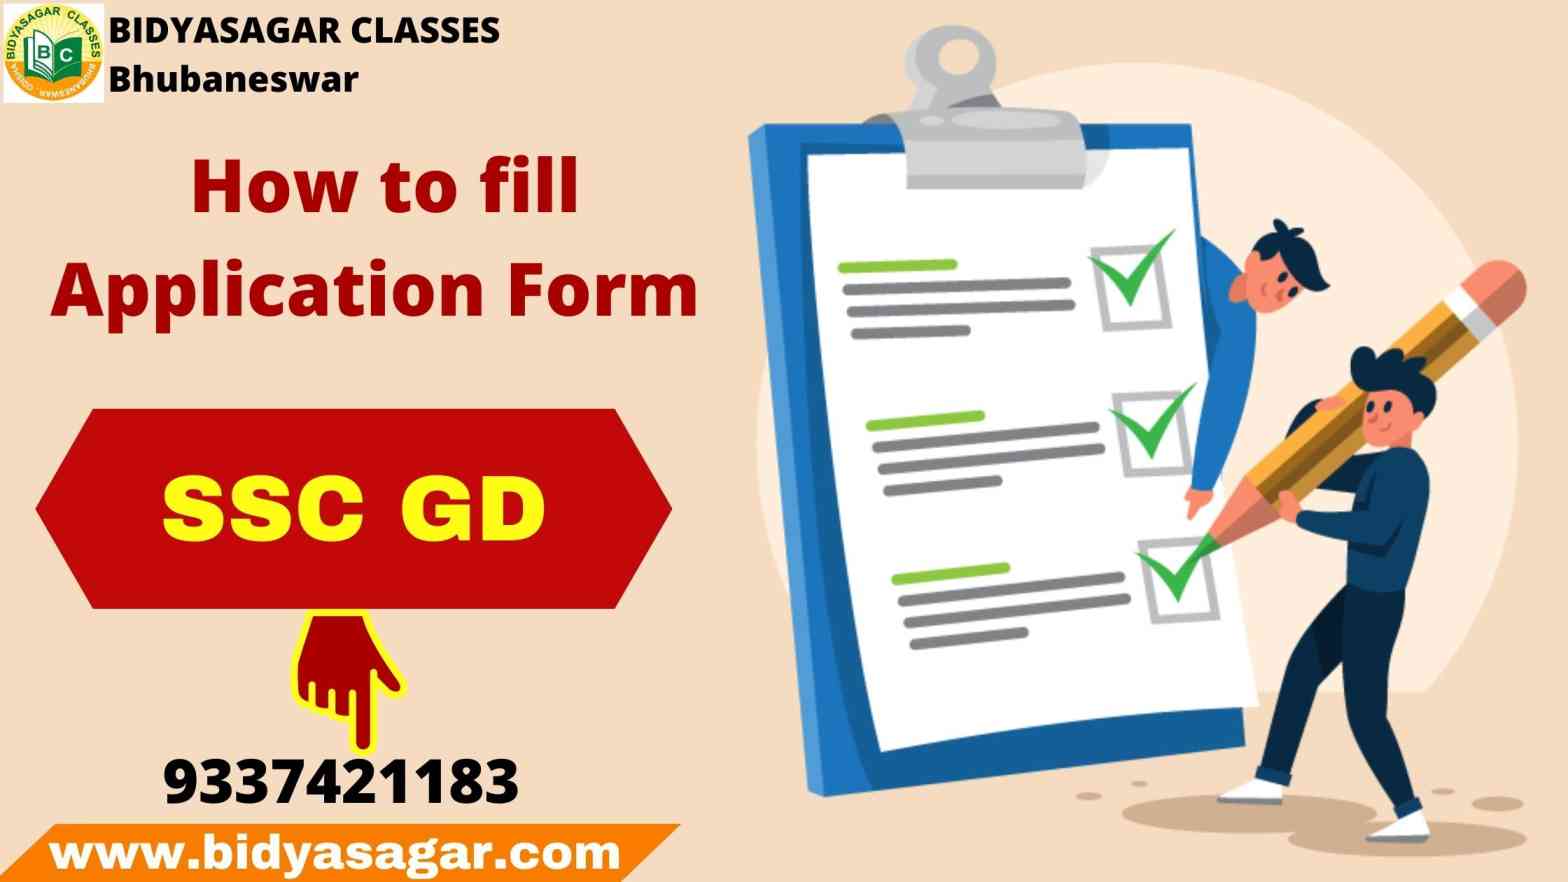 How to Fill SSC GD Application Form 2020-21?